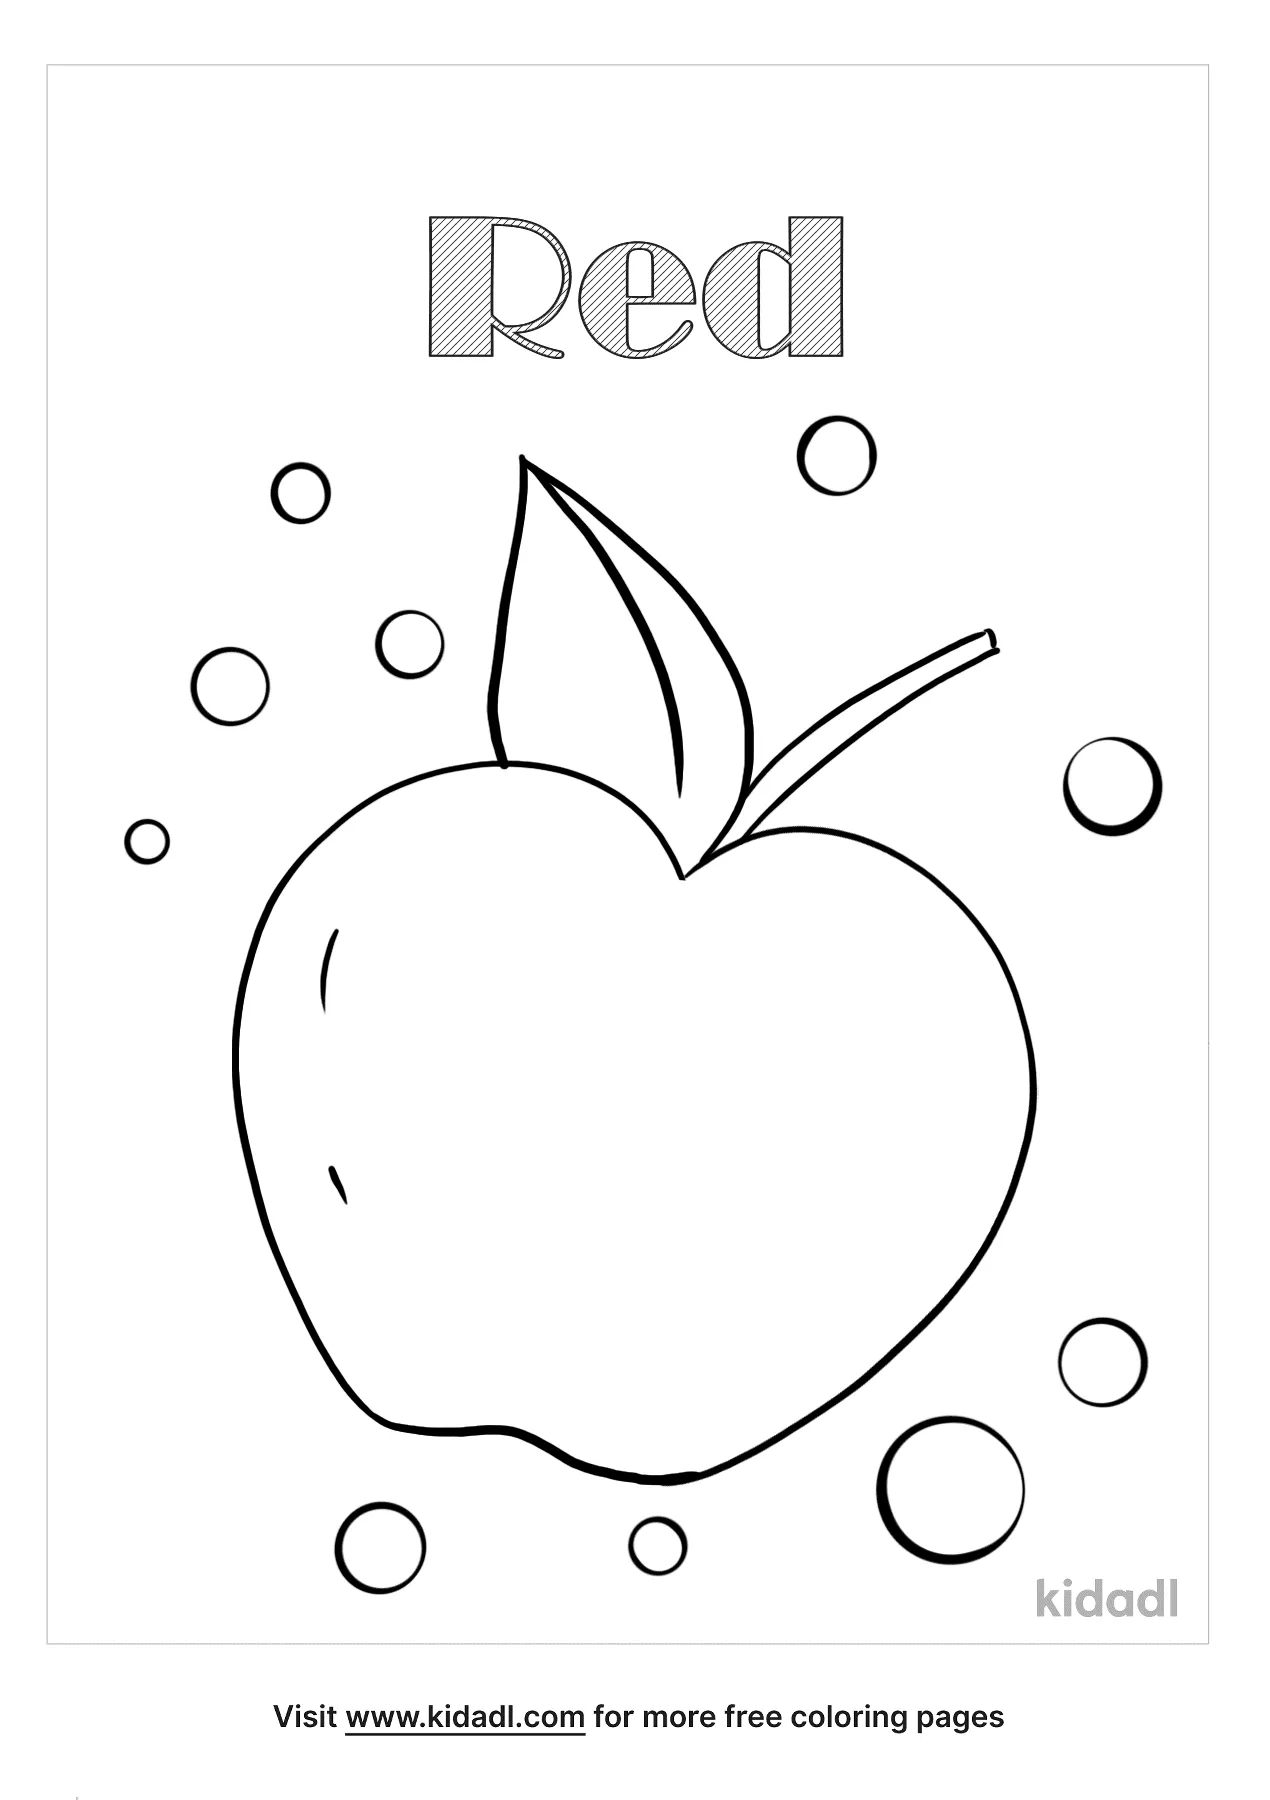 Color Red Coloring Pages   Free Preschool Coloring Pages   Kidadl